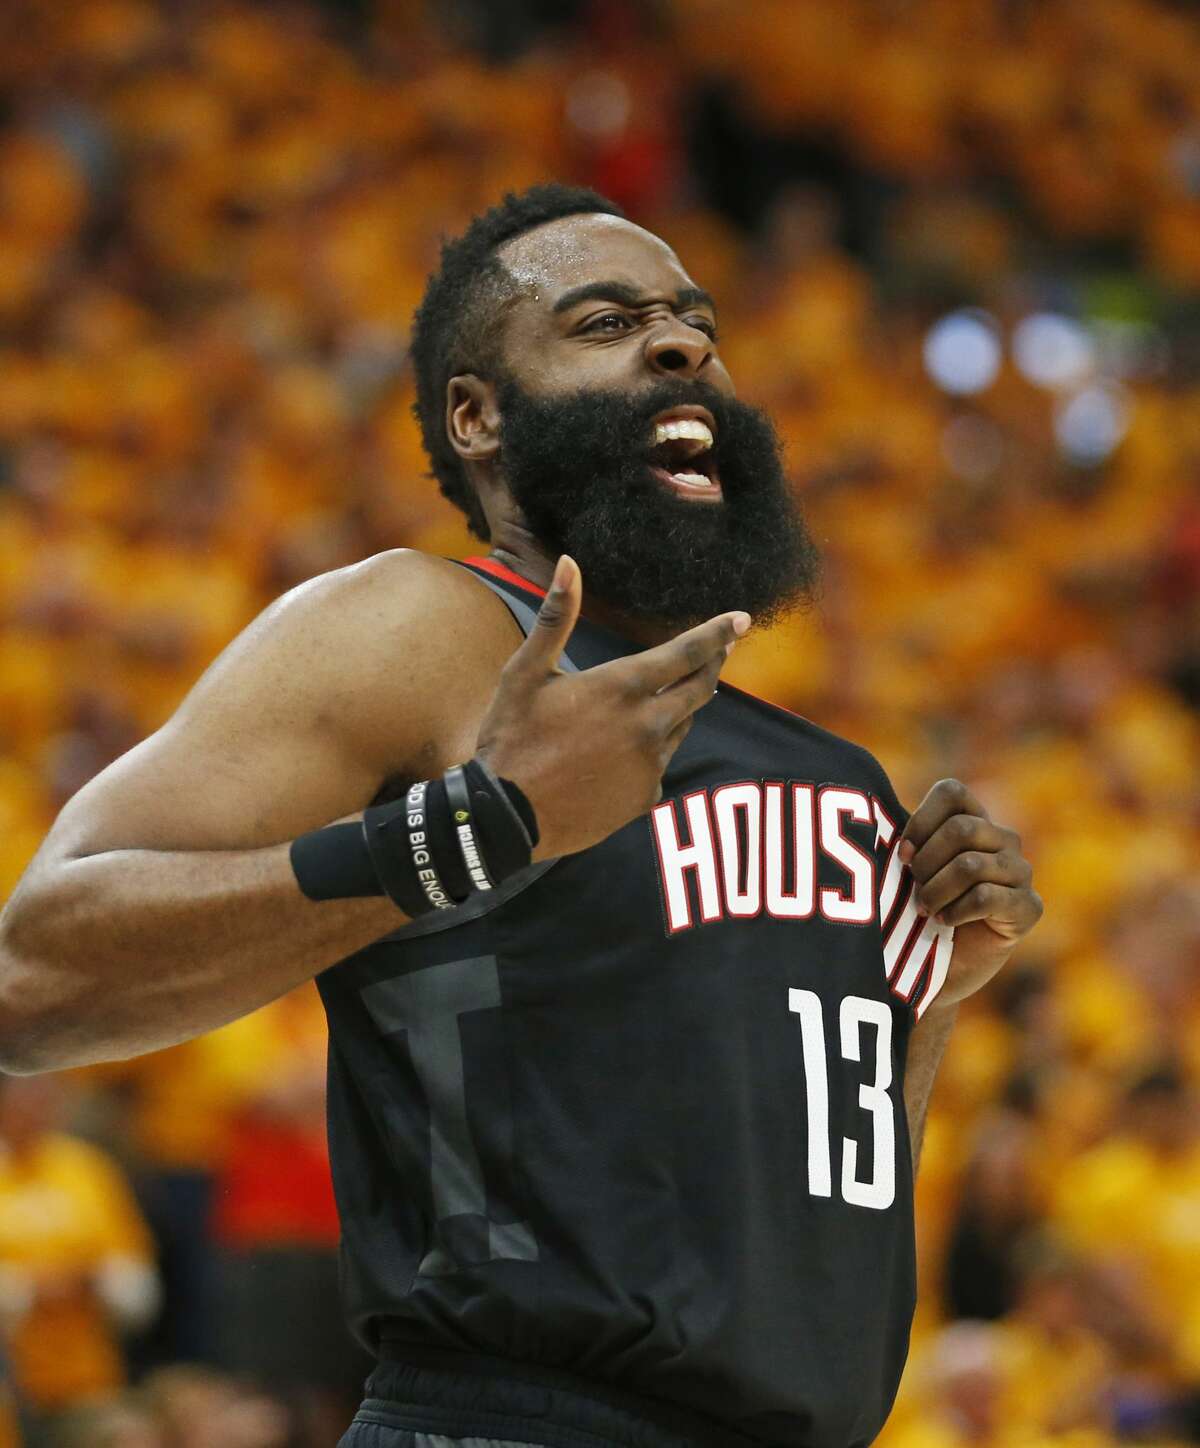 Houston Rockets guard James Harden (13) reacts after a foul in the first half during an NBA basketball game against the Utah Jazz Saturday, April 20, 2019, in Salt Lake City. (AP Photo/Rick Bowmer)